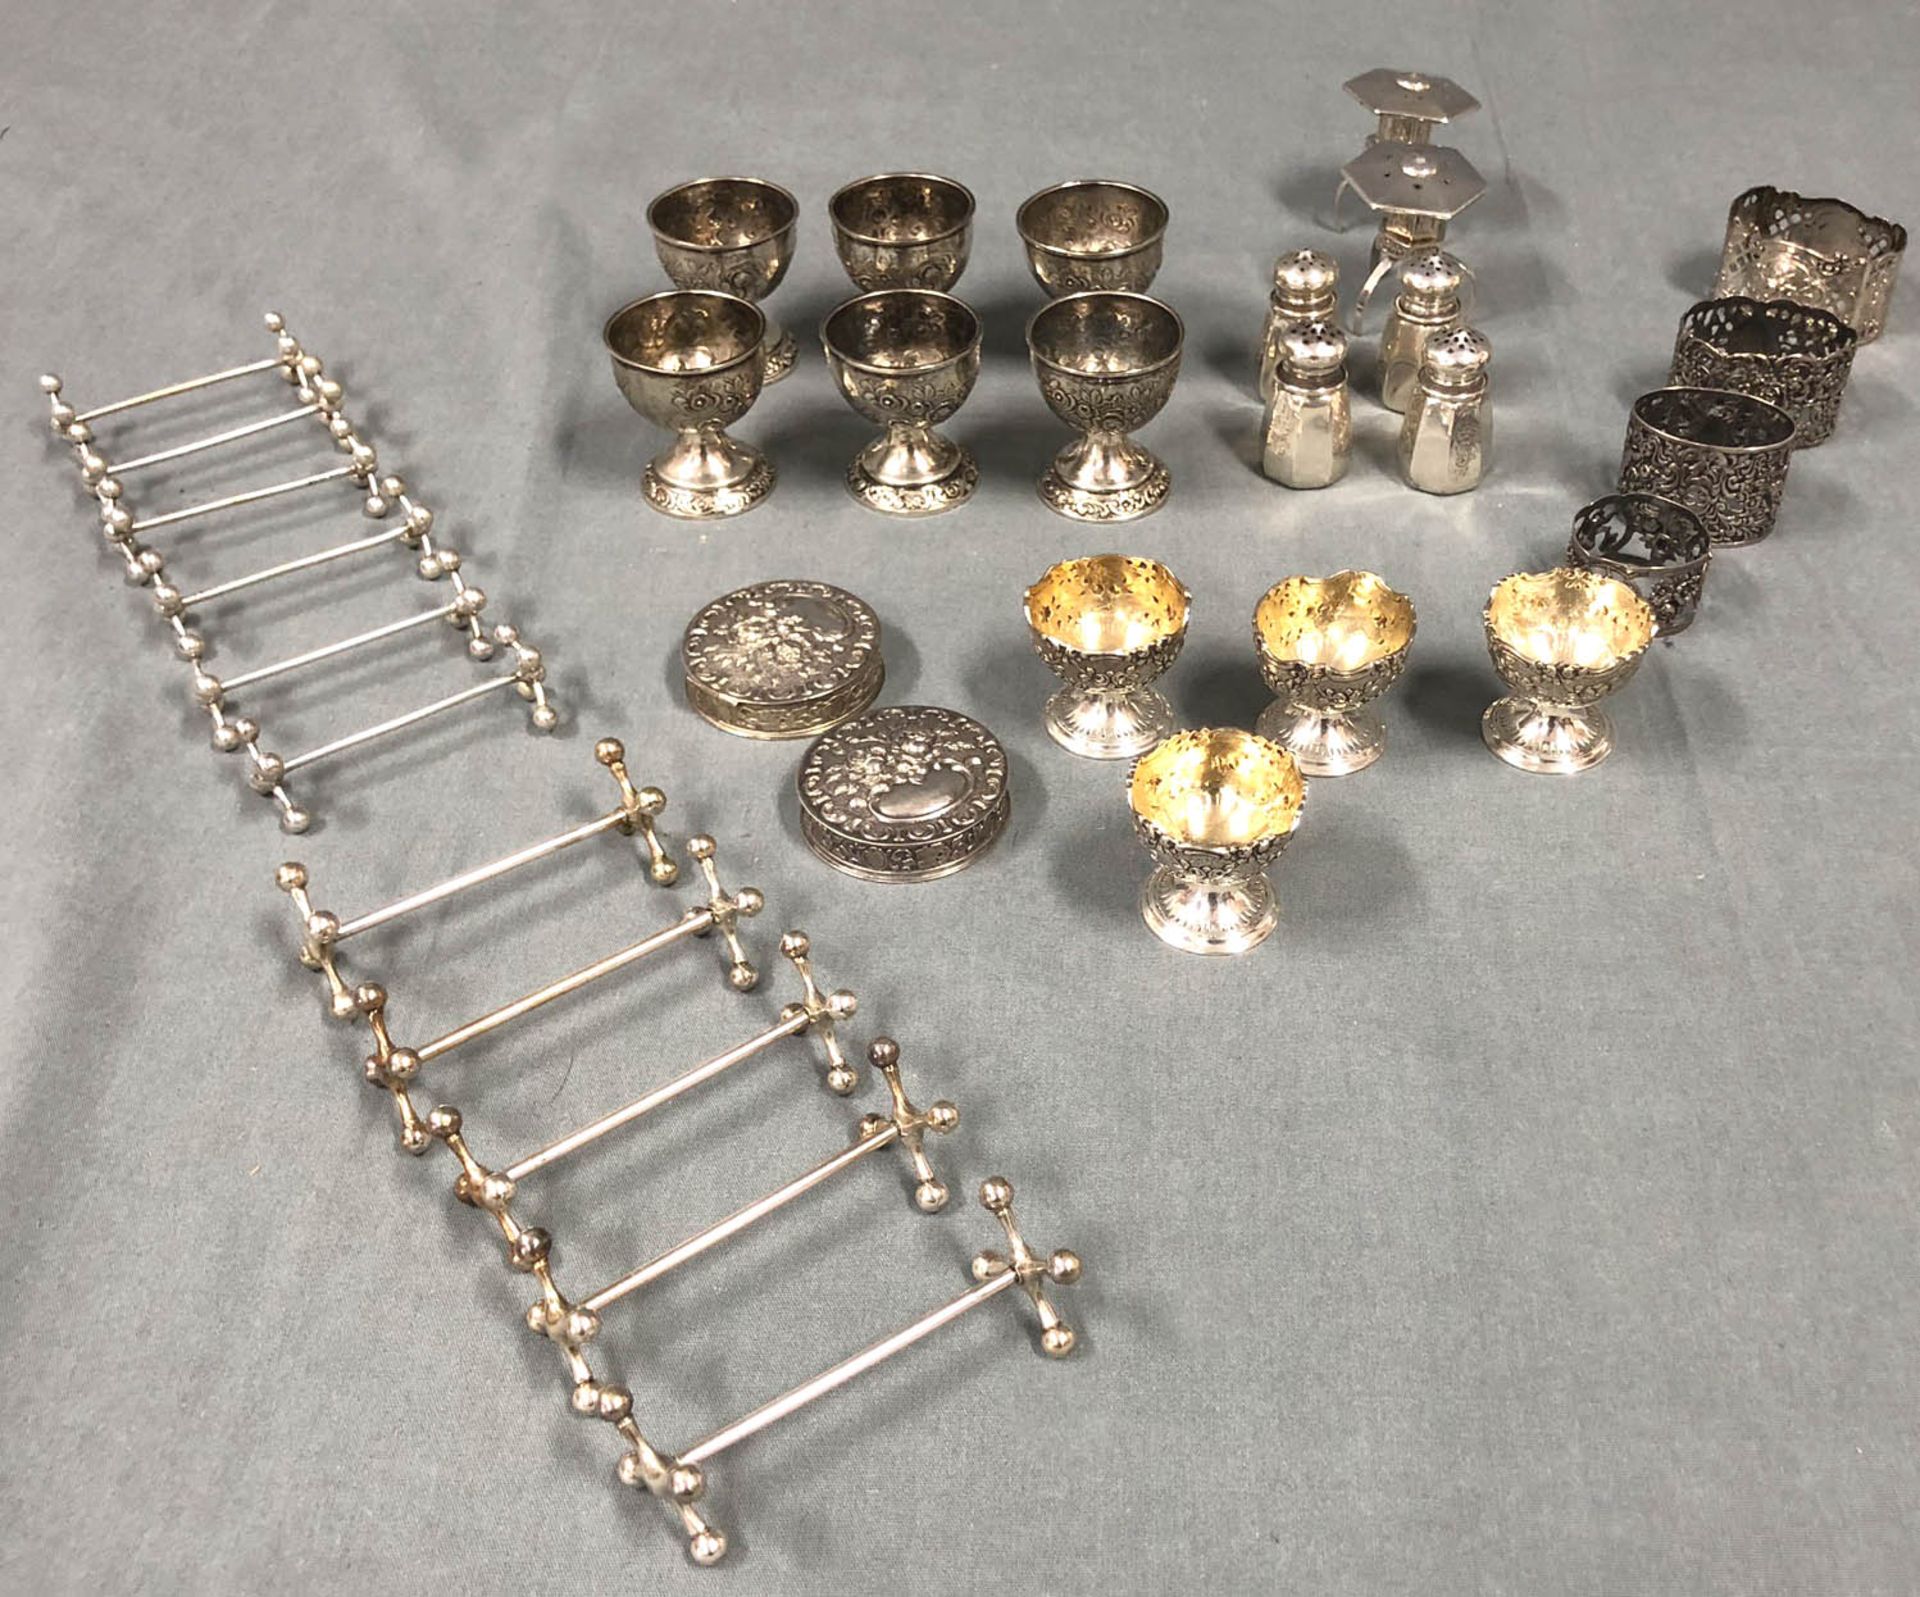 Silver. Also egg cups, knife banks, salt and spice shakers.1016 grams. Some egg cups with gilding